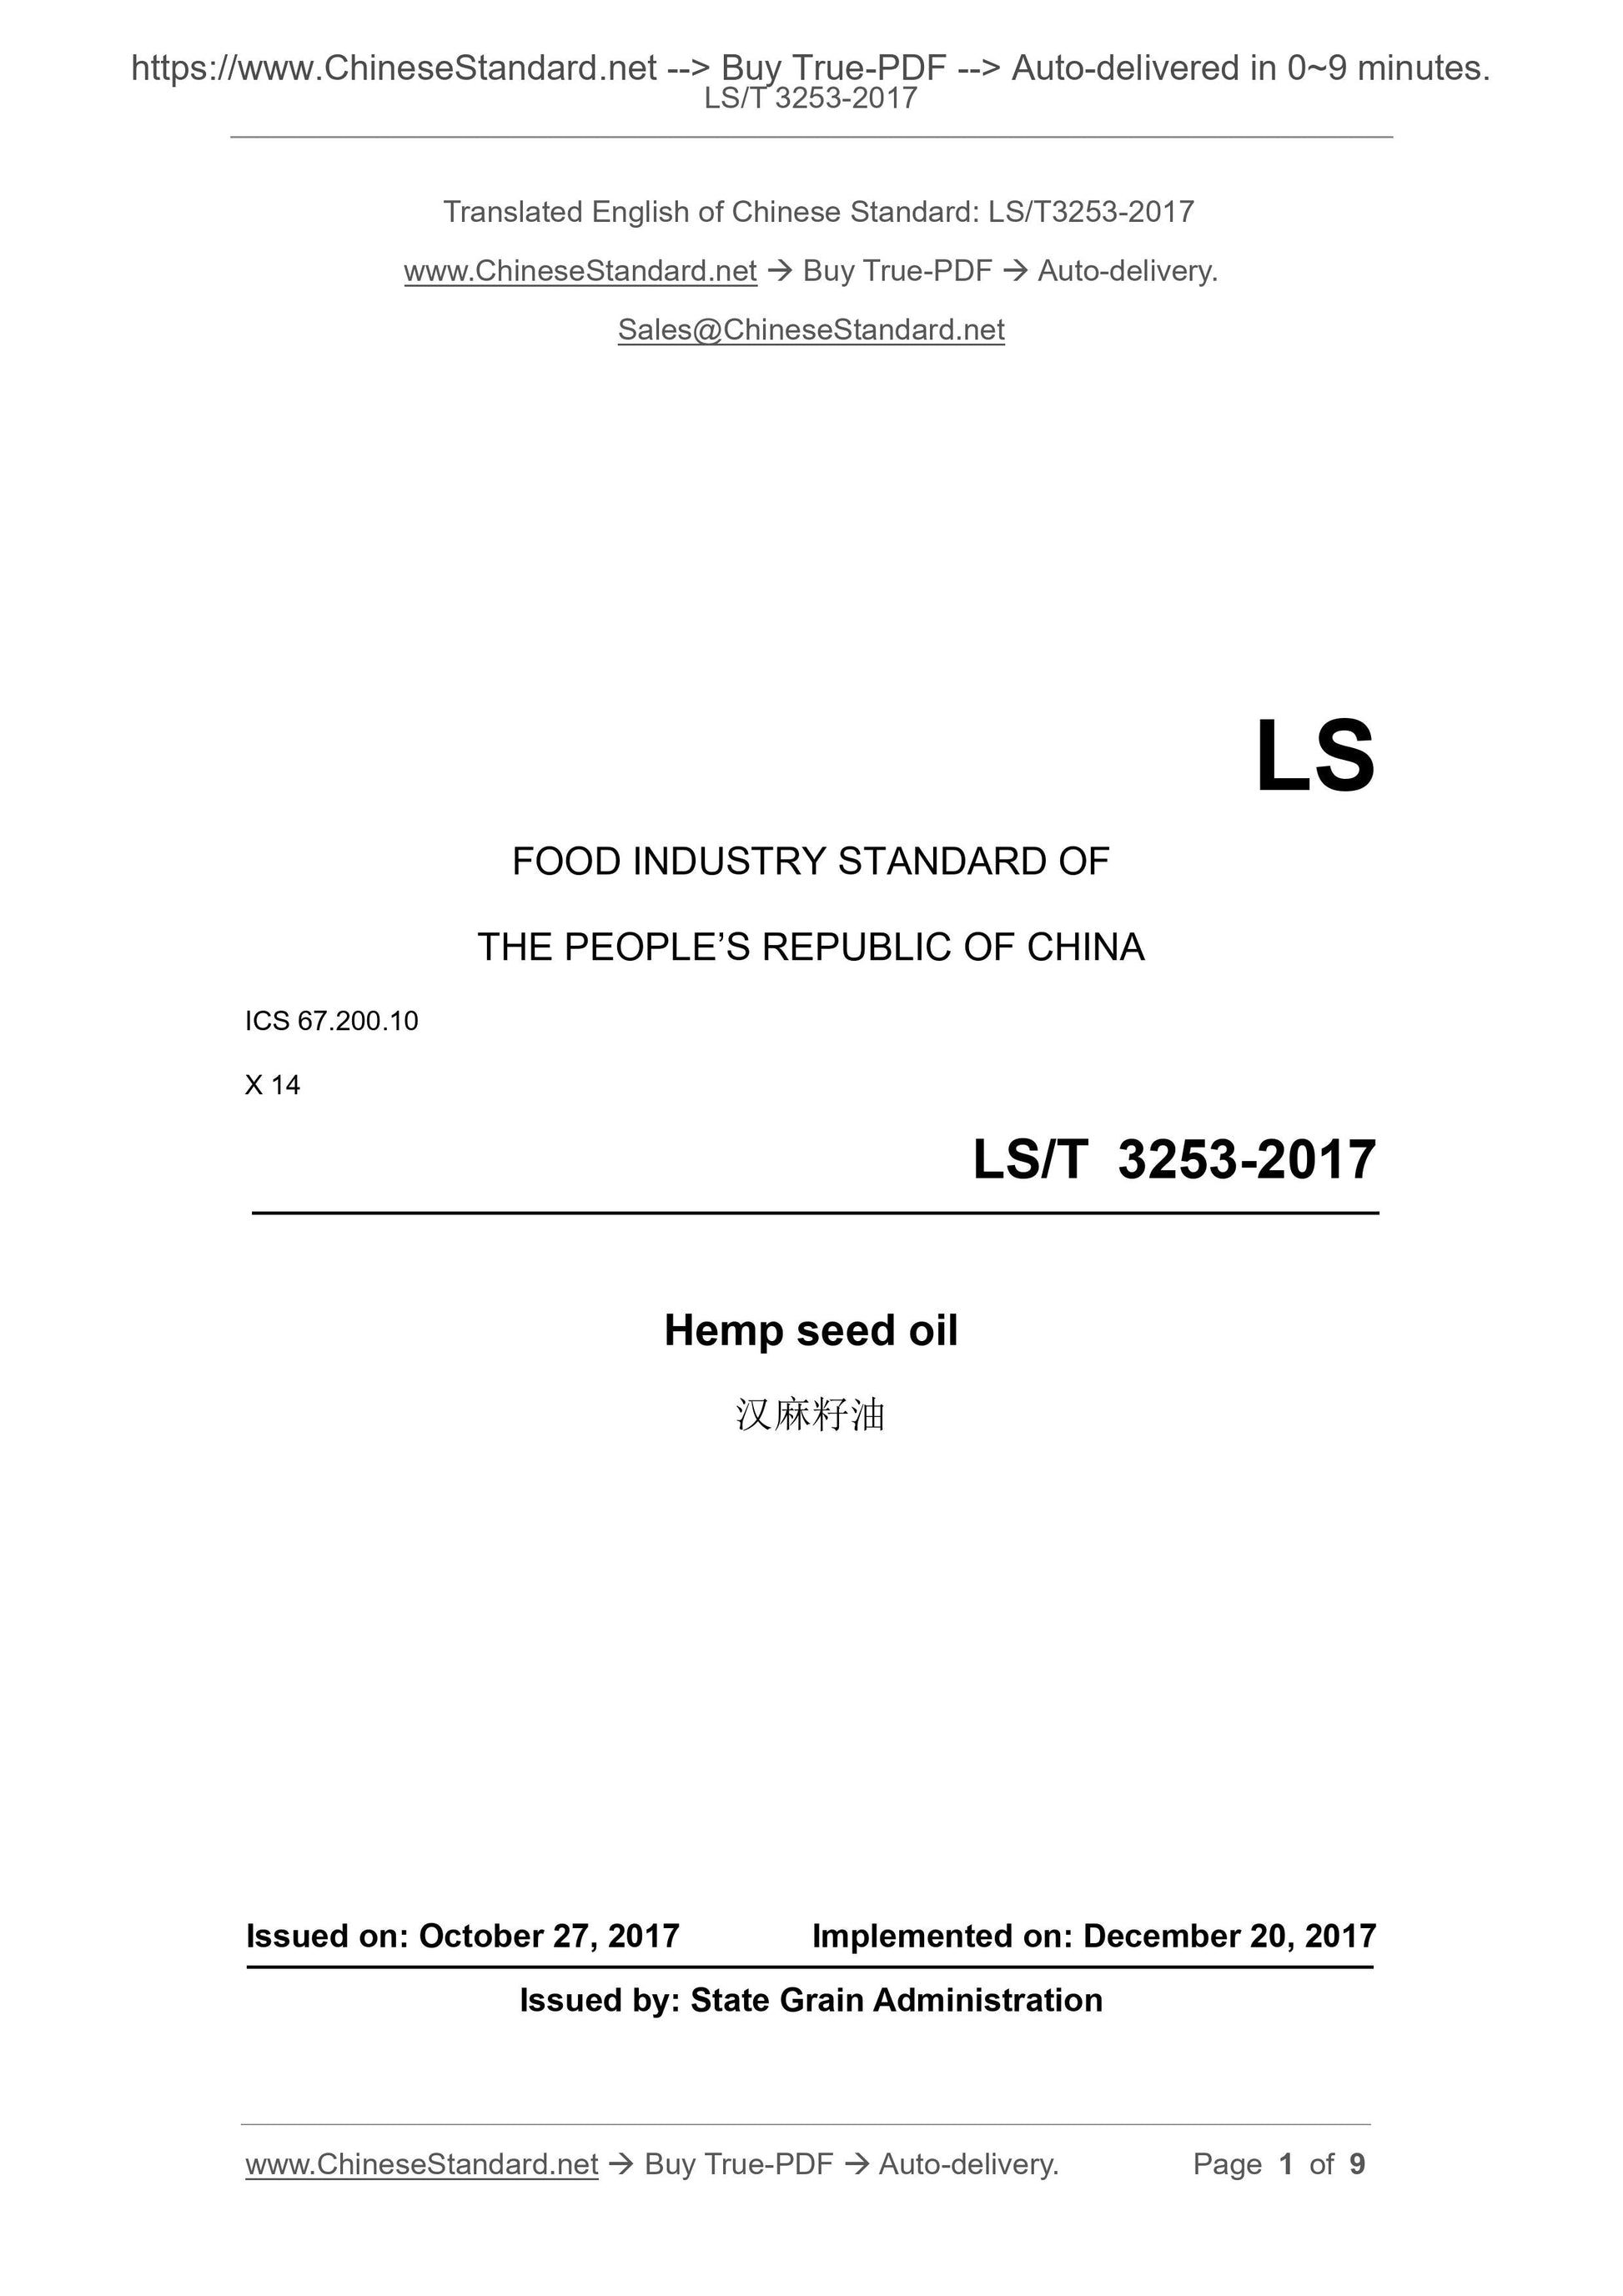 LS/T 3253-2017 Page 1